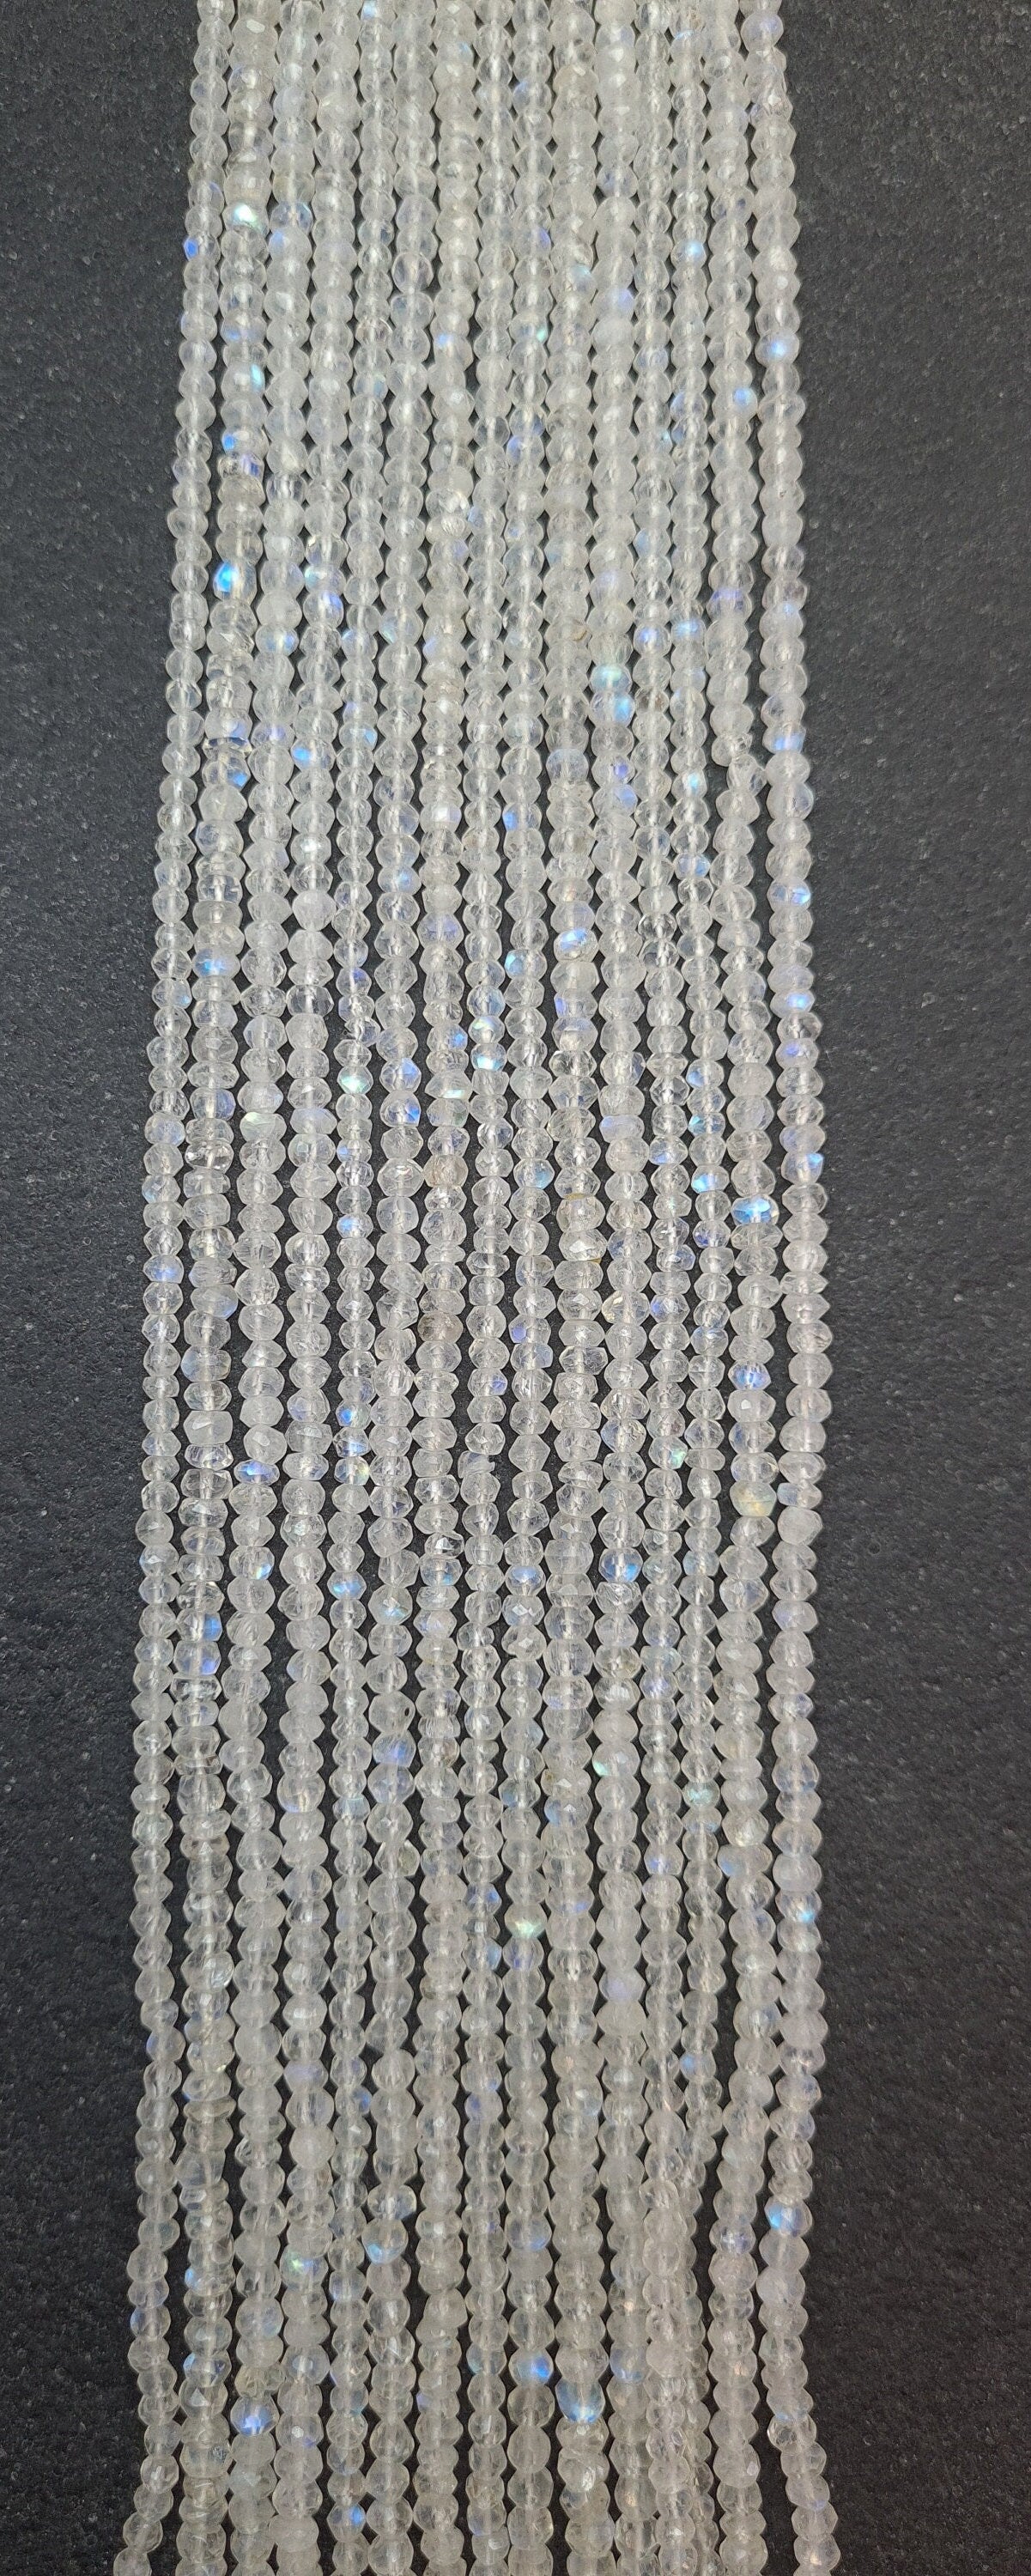 Moonstone Gemstone Beads. Natural Rondelle Faceted Moonstone Gemstone with strand length 13" size 3x4mm,2x4mm